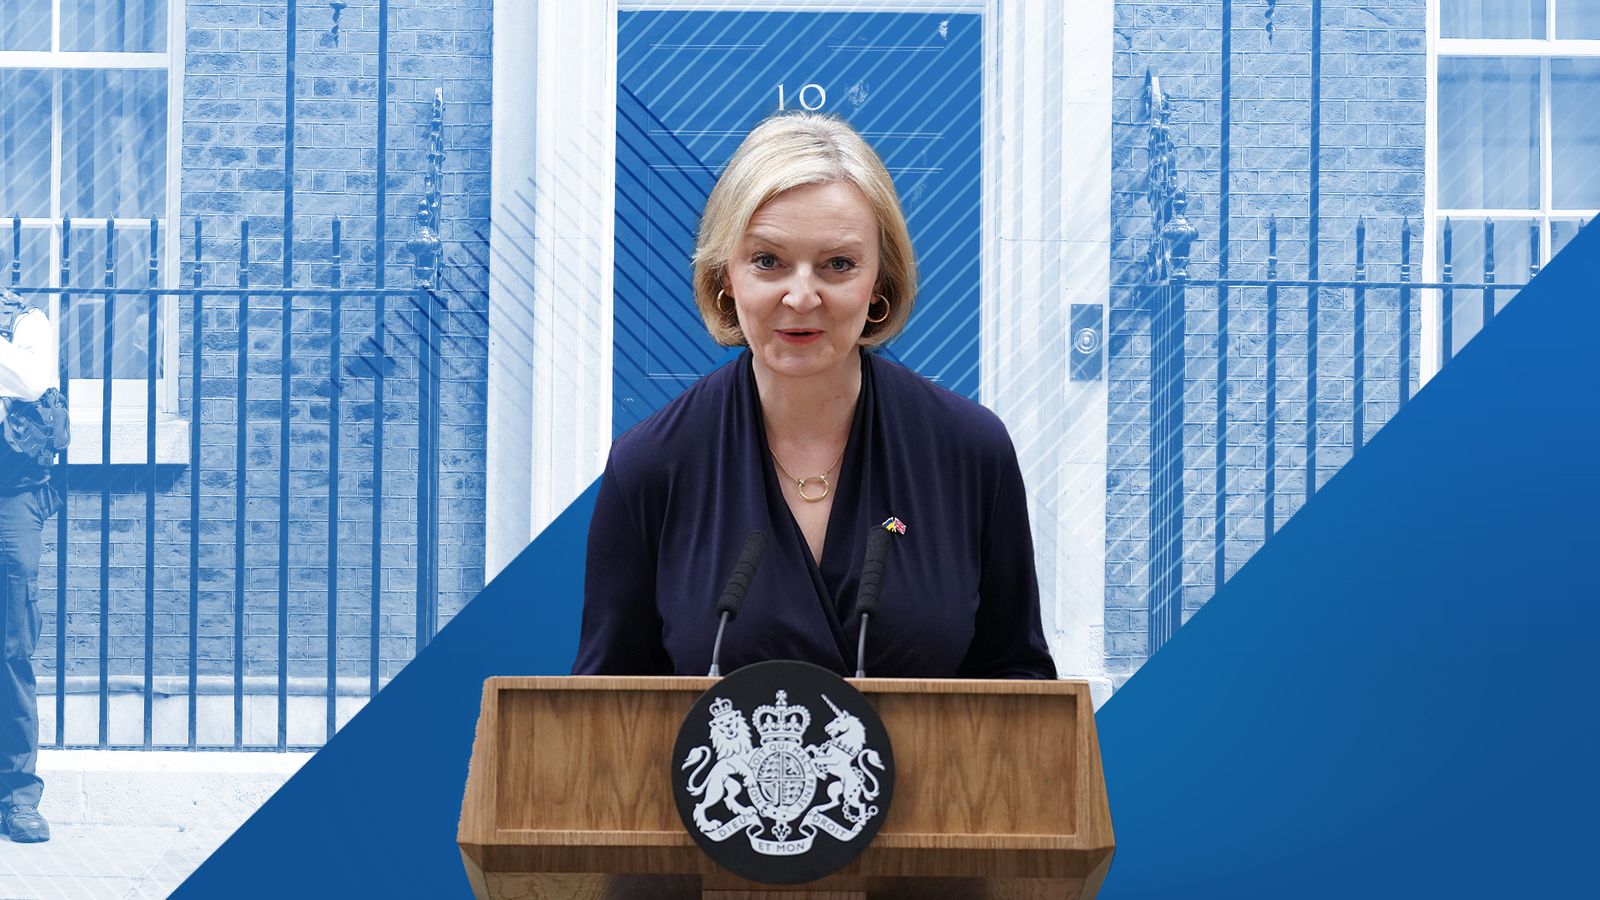 Liz Truss resigns - and will become shortest-serving prime minister in British history